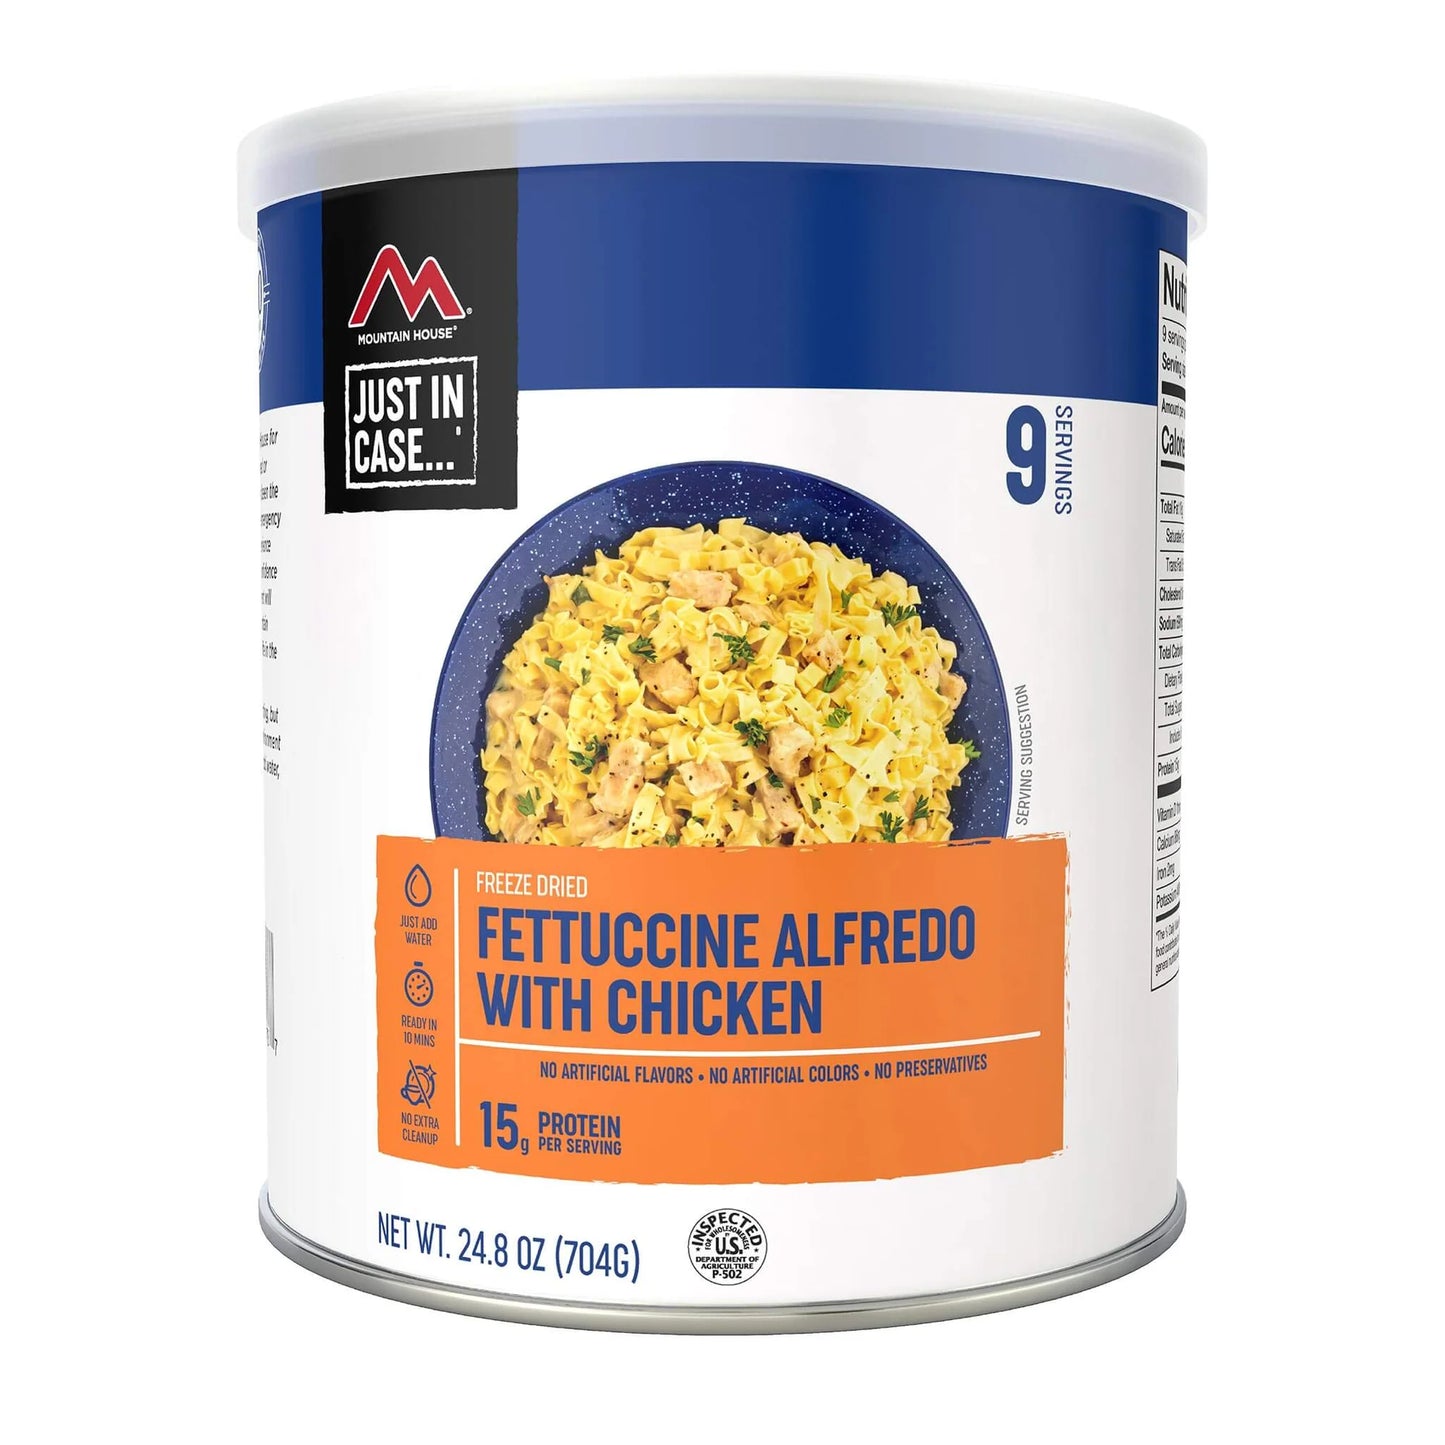 Quick & Easy Campfire Comfort: Freeze-Dried Fettuccine Alfredo with Chicken (9 Servings) - No Cookin' Required!